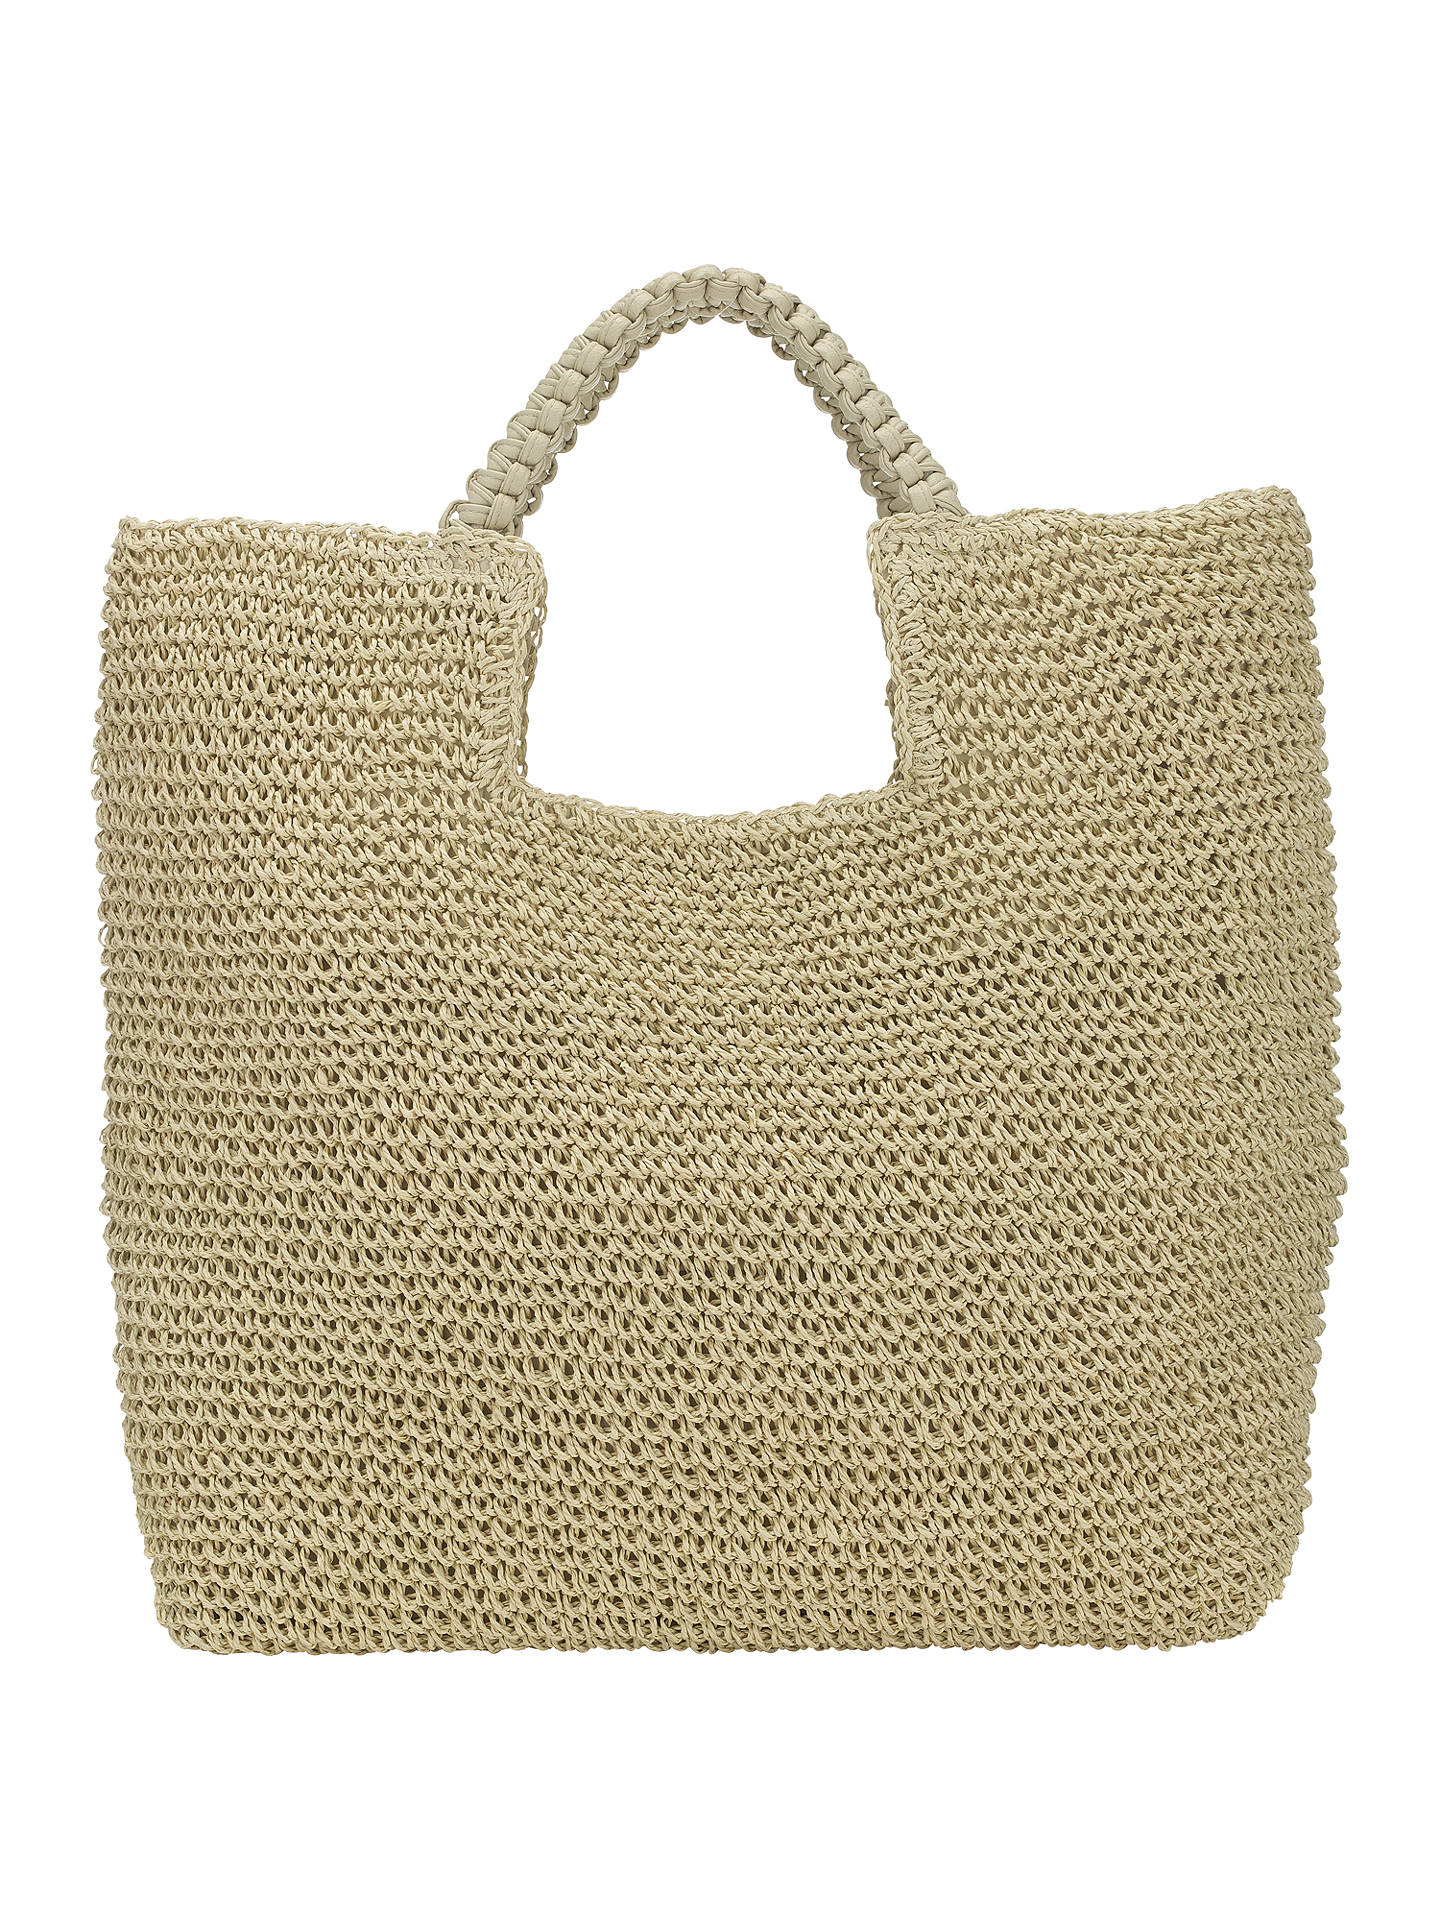 Collection WEEKEND by John Lewis Straw Shopper Bag at John Lewis & Partners